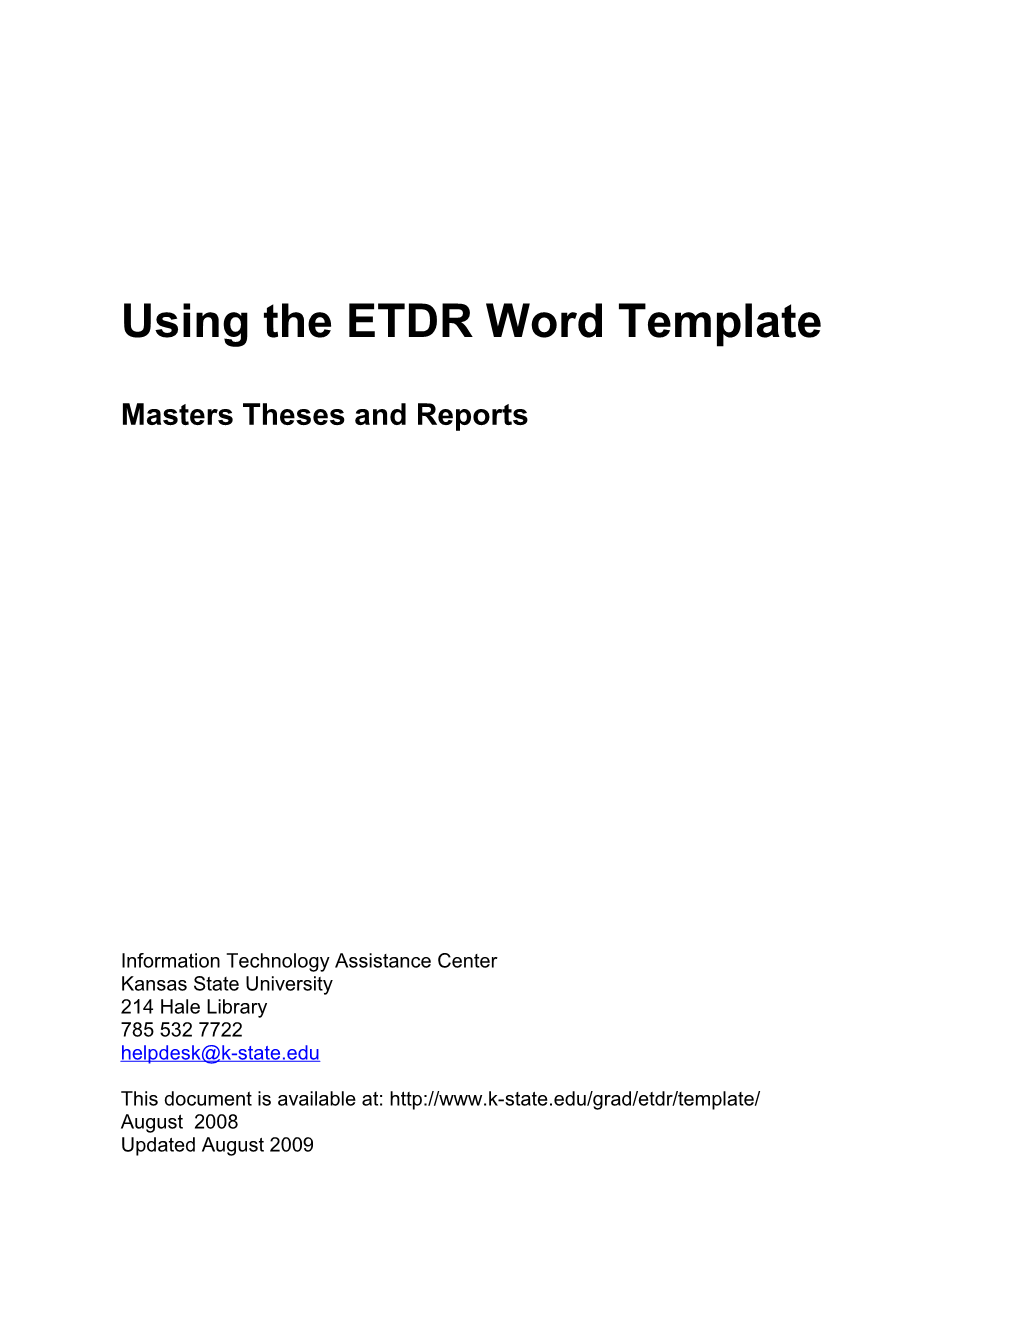 Microsoft Word Template For Masters Theses And Reports